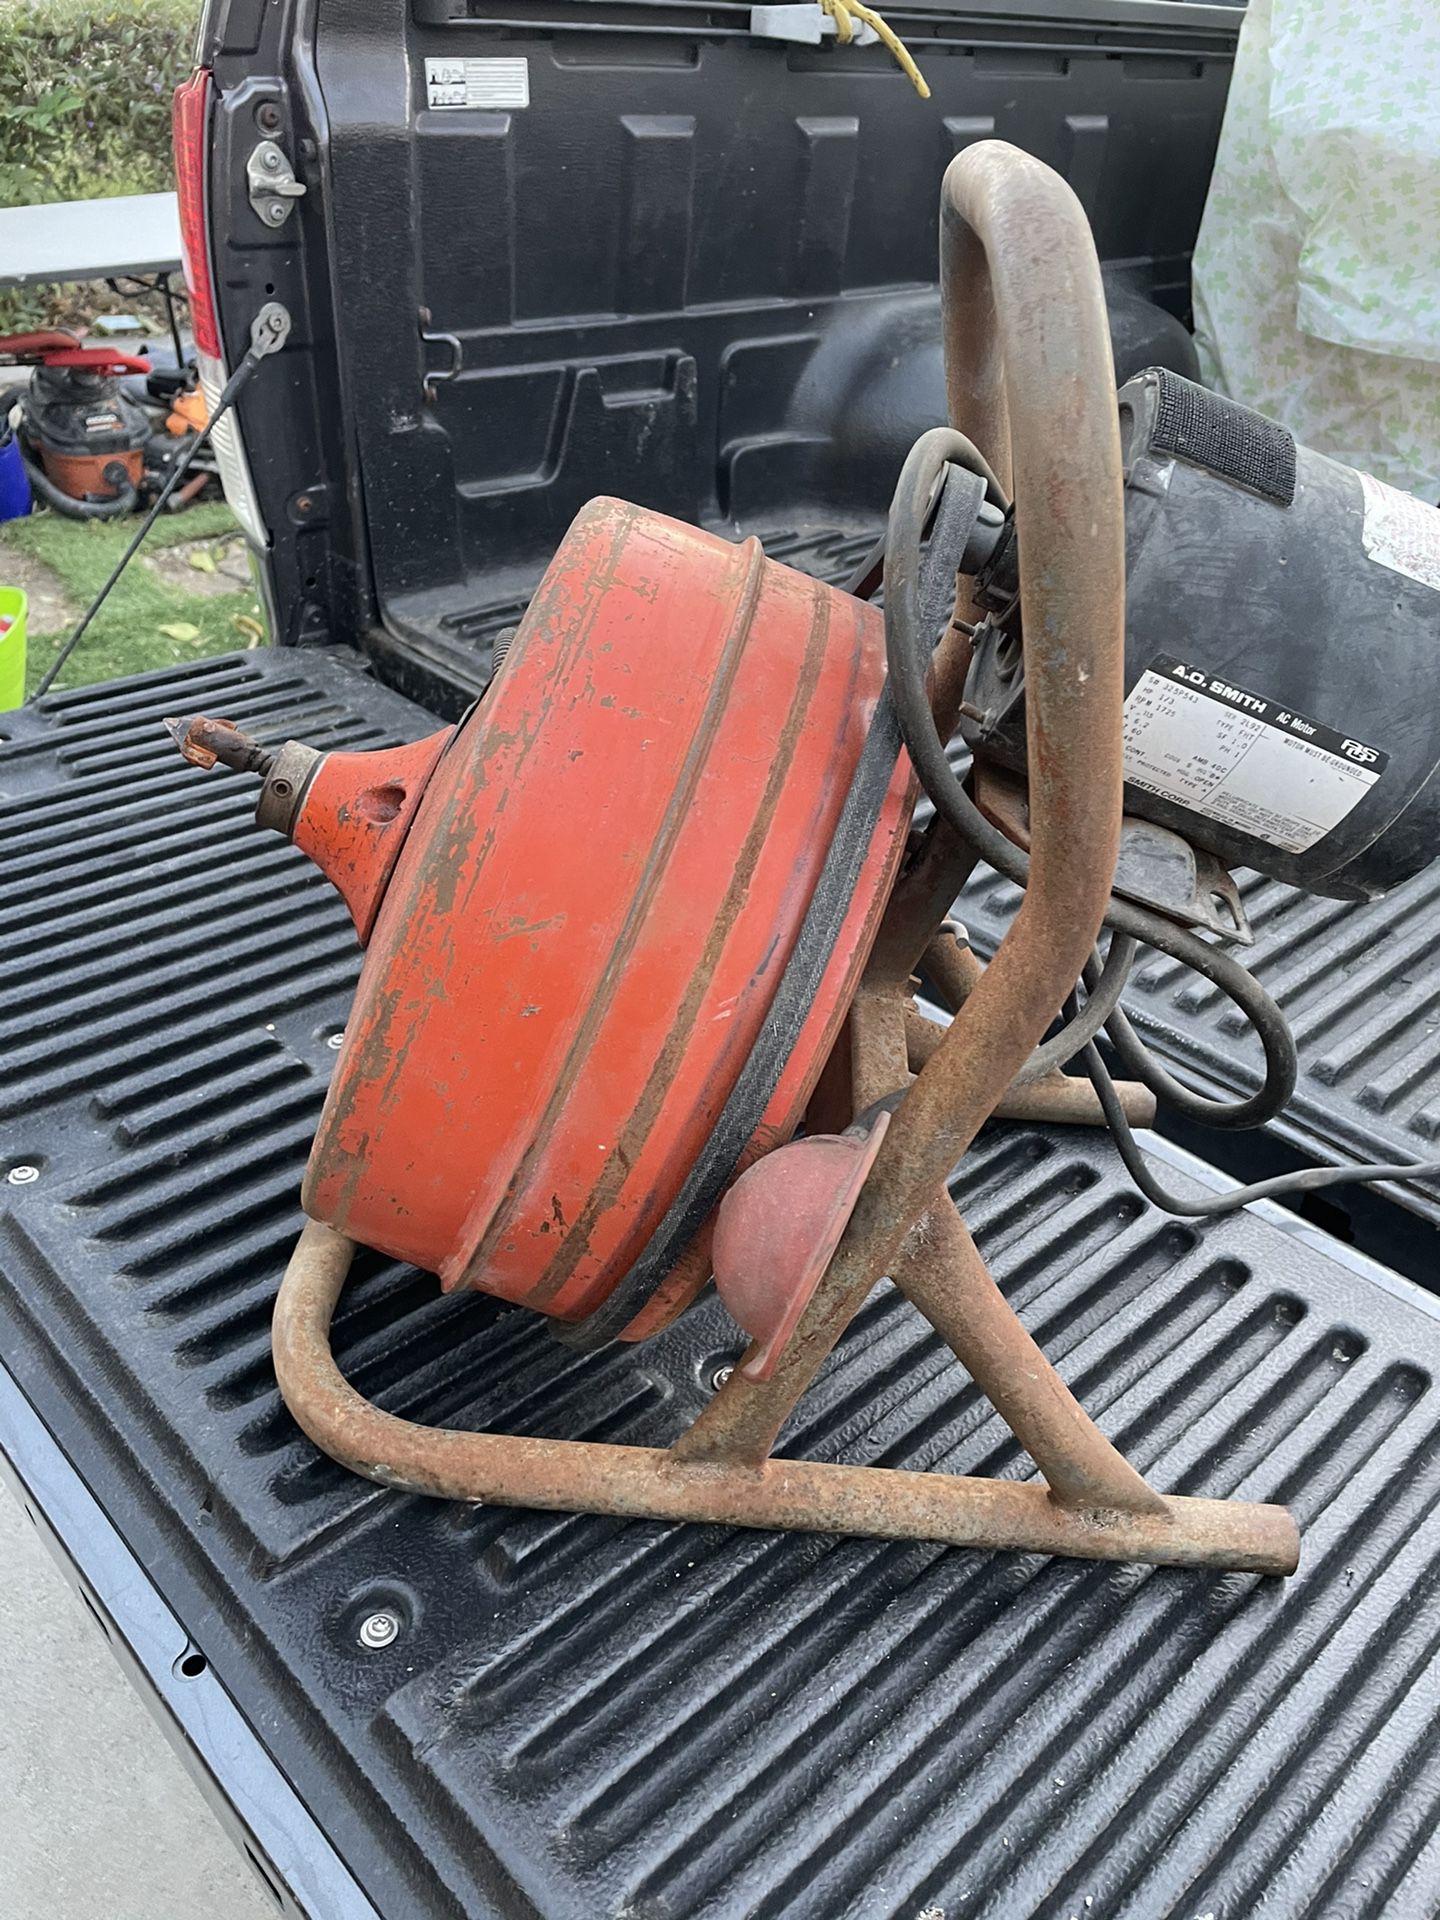 50 Ft. Snake-Power Feed Drain Cleaner for Sale in Downey, CA - OfferUp